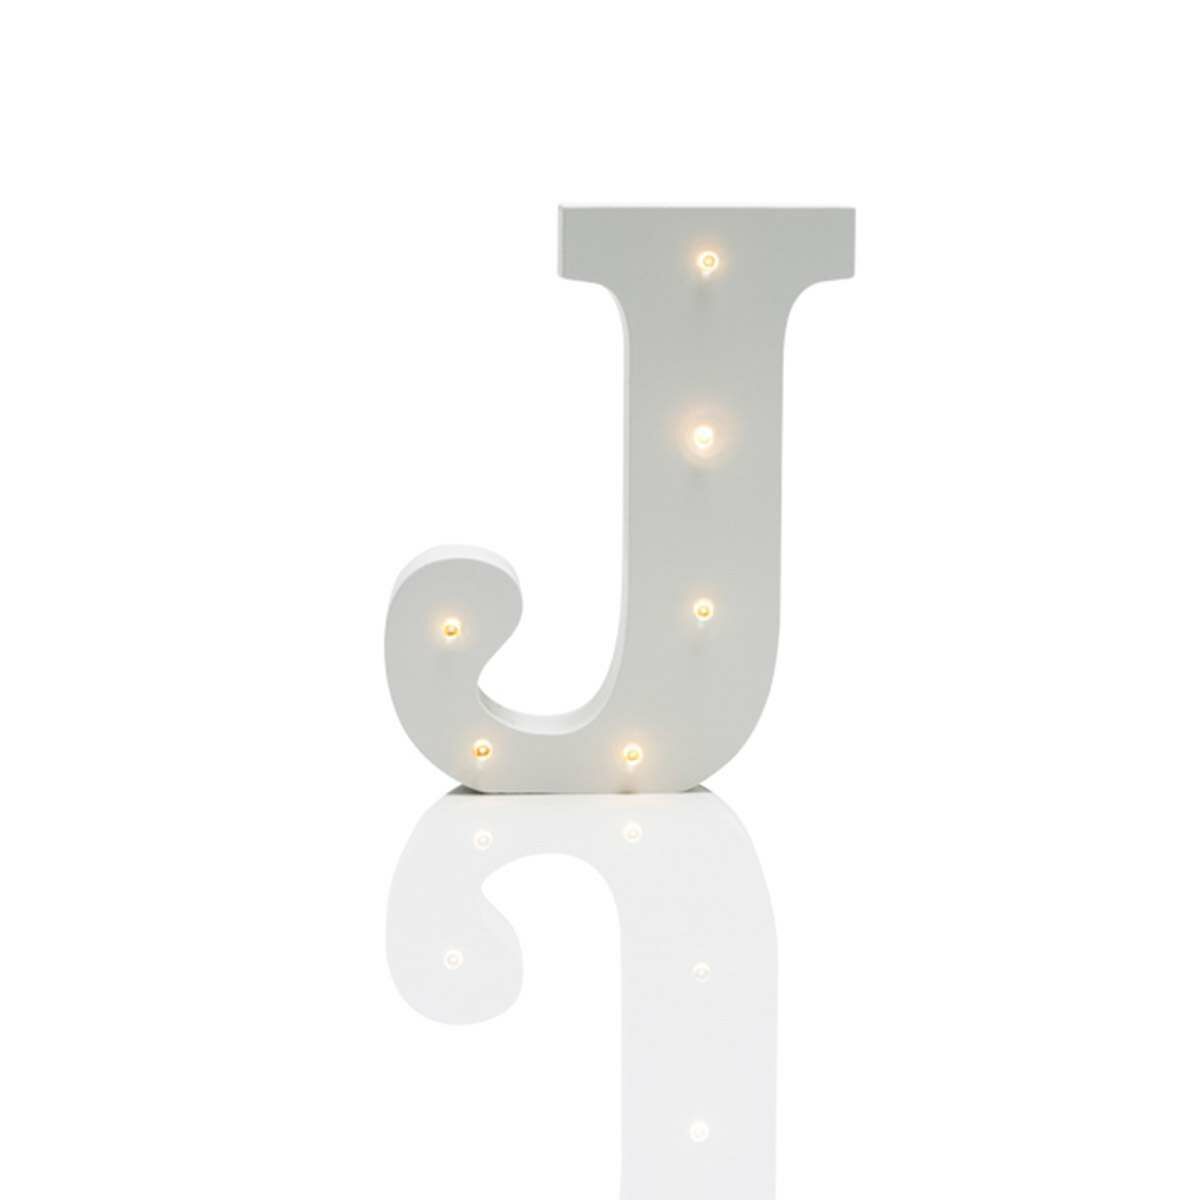 Alphabet 'J' Marquee Battery Light Up Circus Letter, Warm White LEDs, 16cm image 1